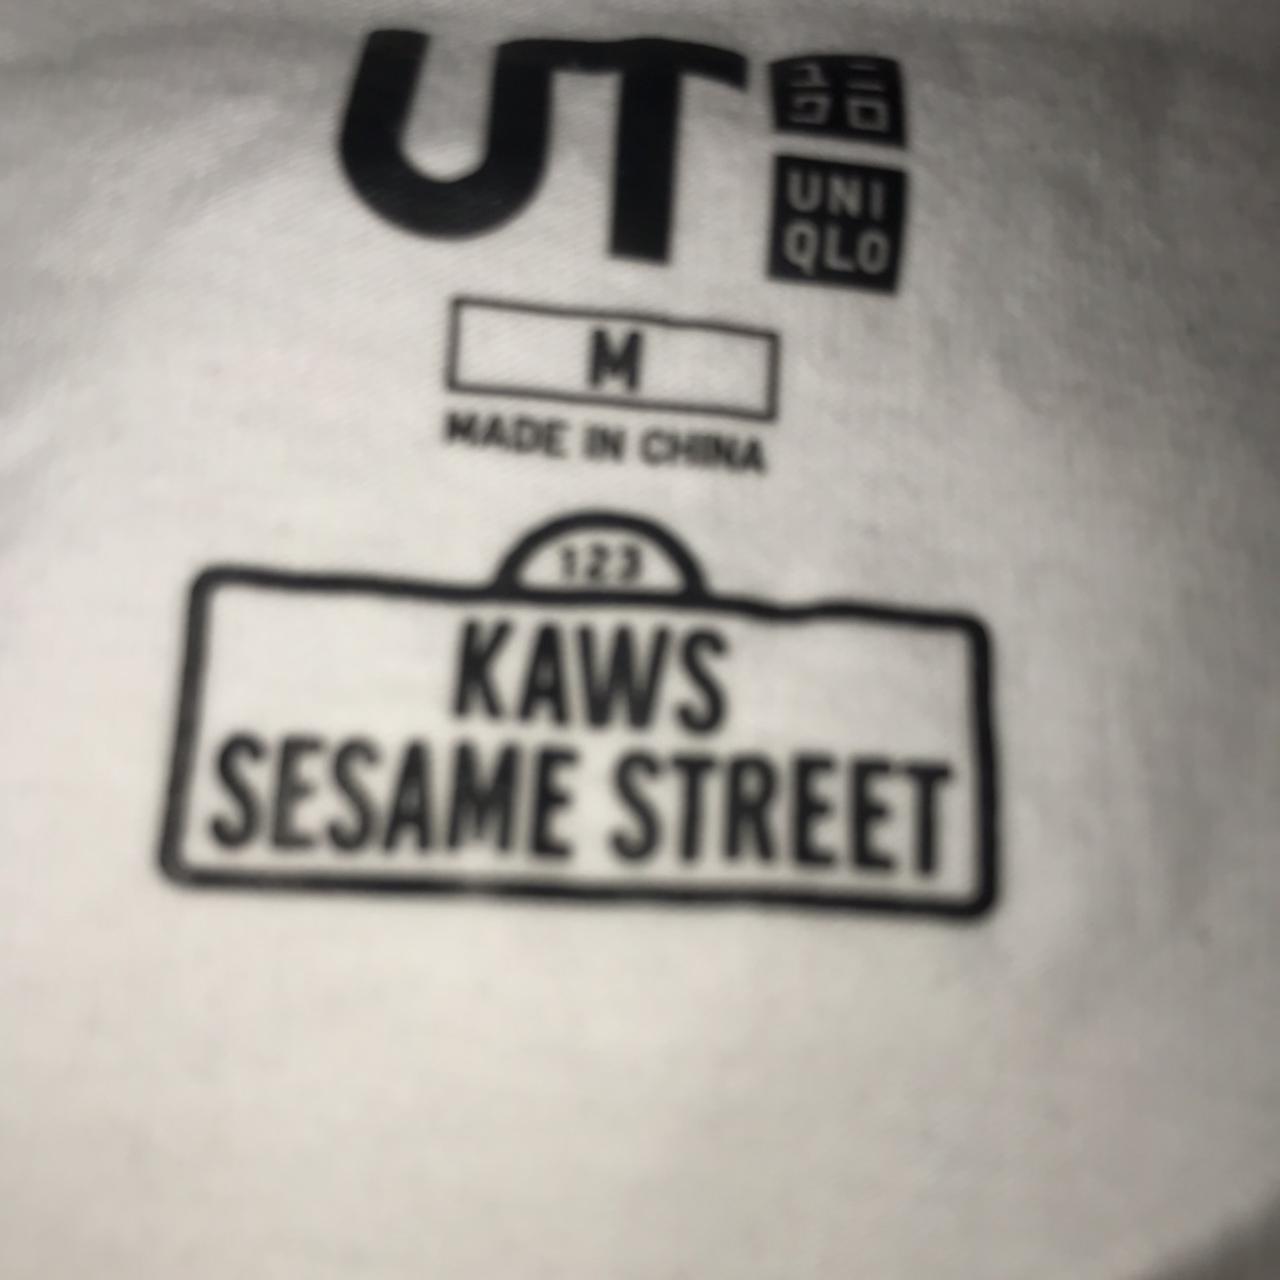 Uniqlo X Kaws Tote Bag Comes New with tags 100% - Depop